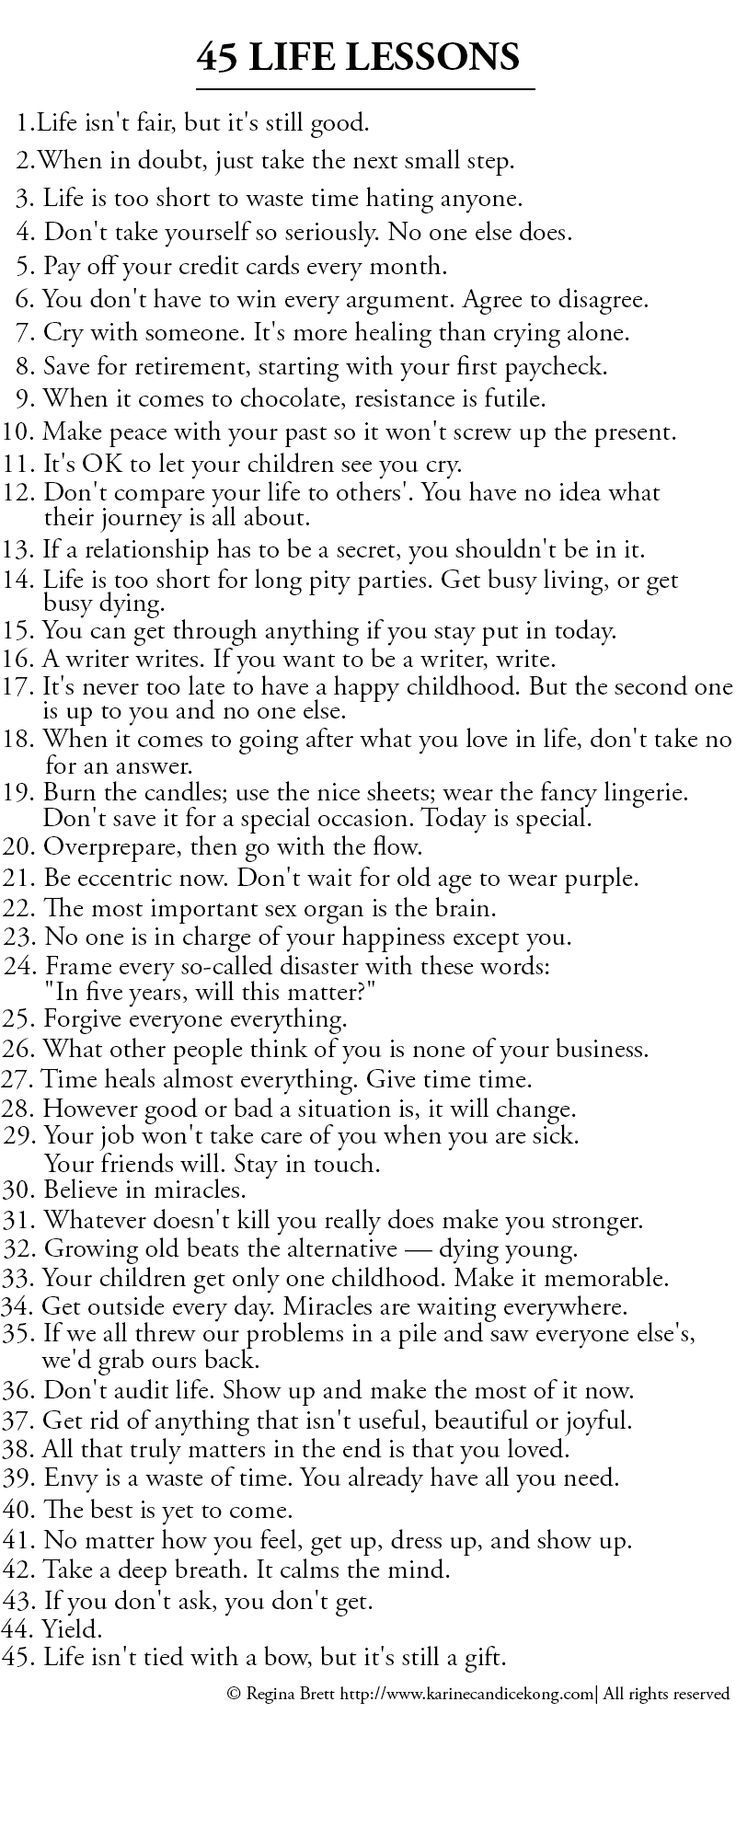 List of 45 Great life lessons to life by.